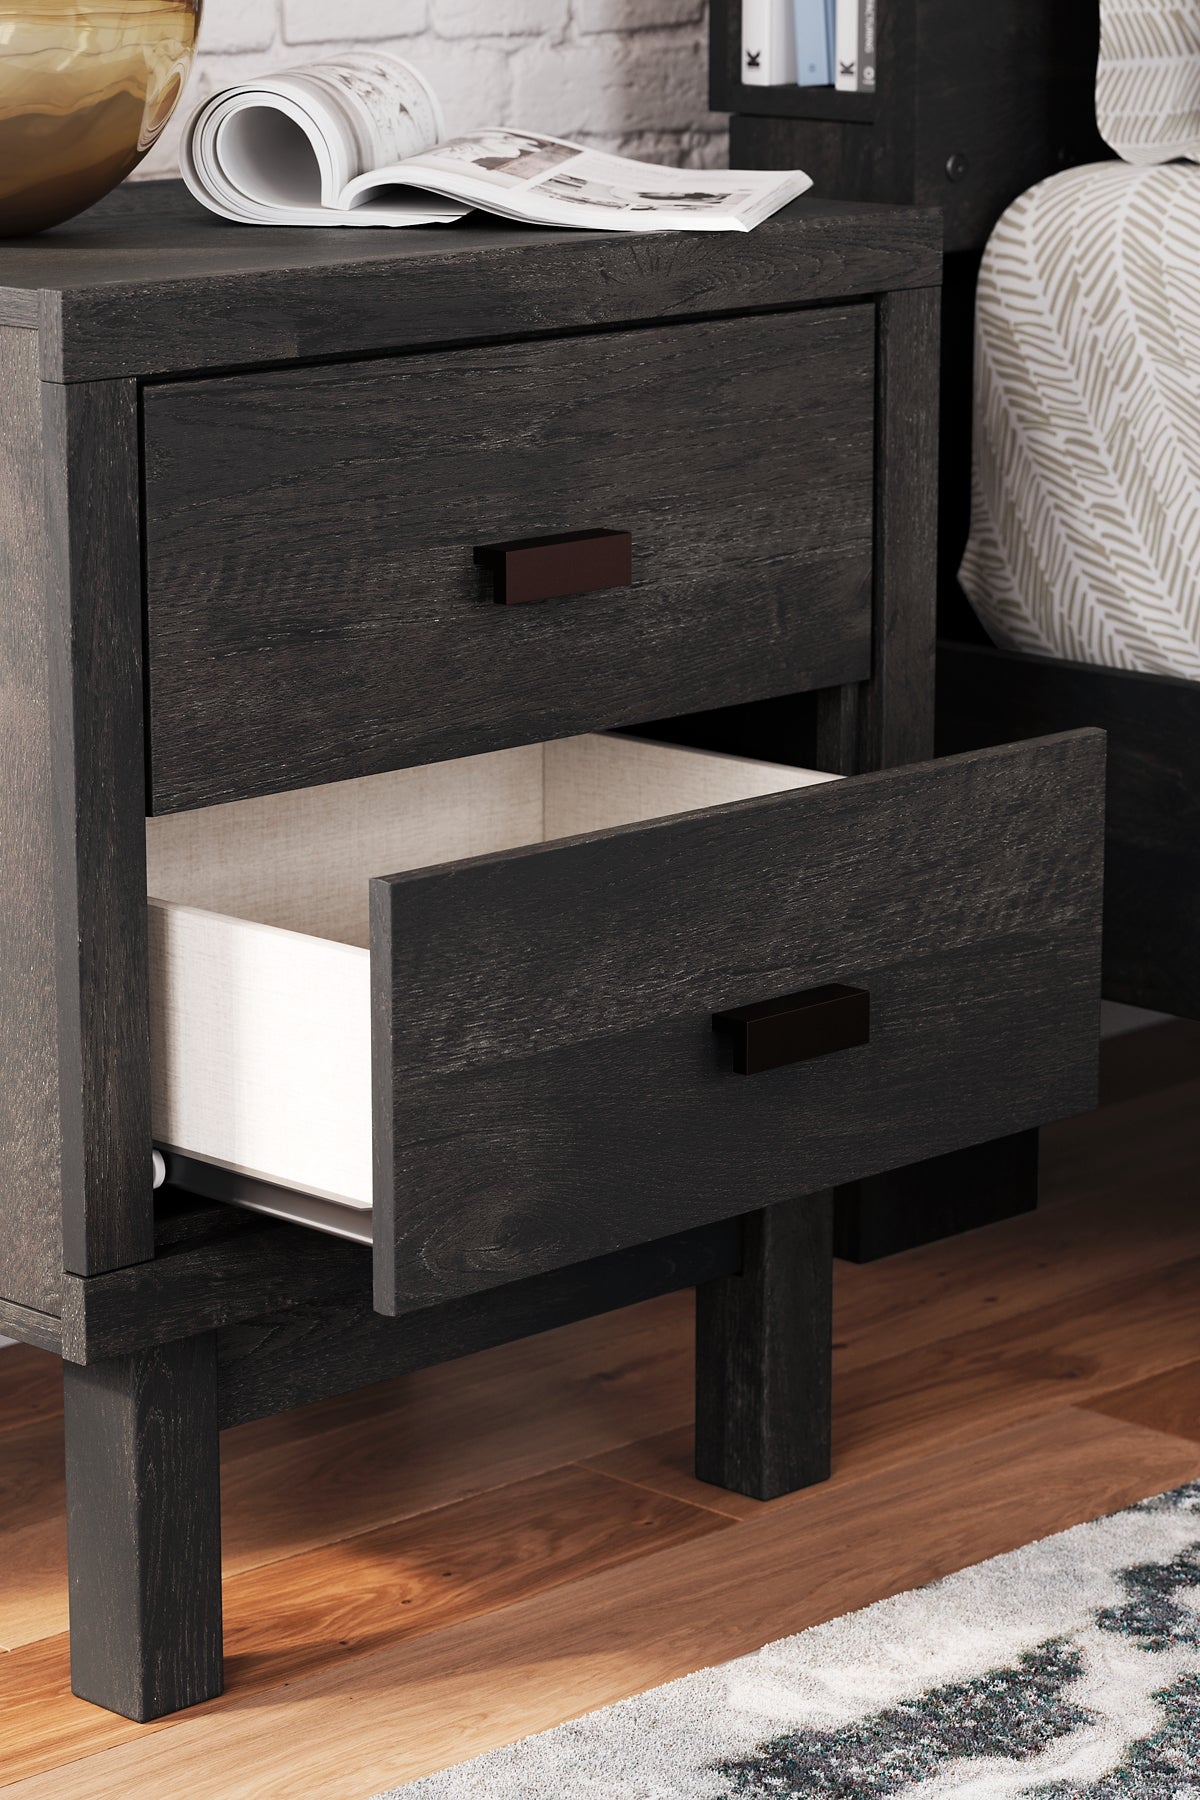 Toretto Queen Bookcase Headboard with Mirrored Dresser and 2 Nightstands